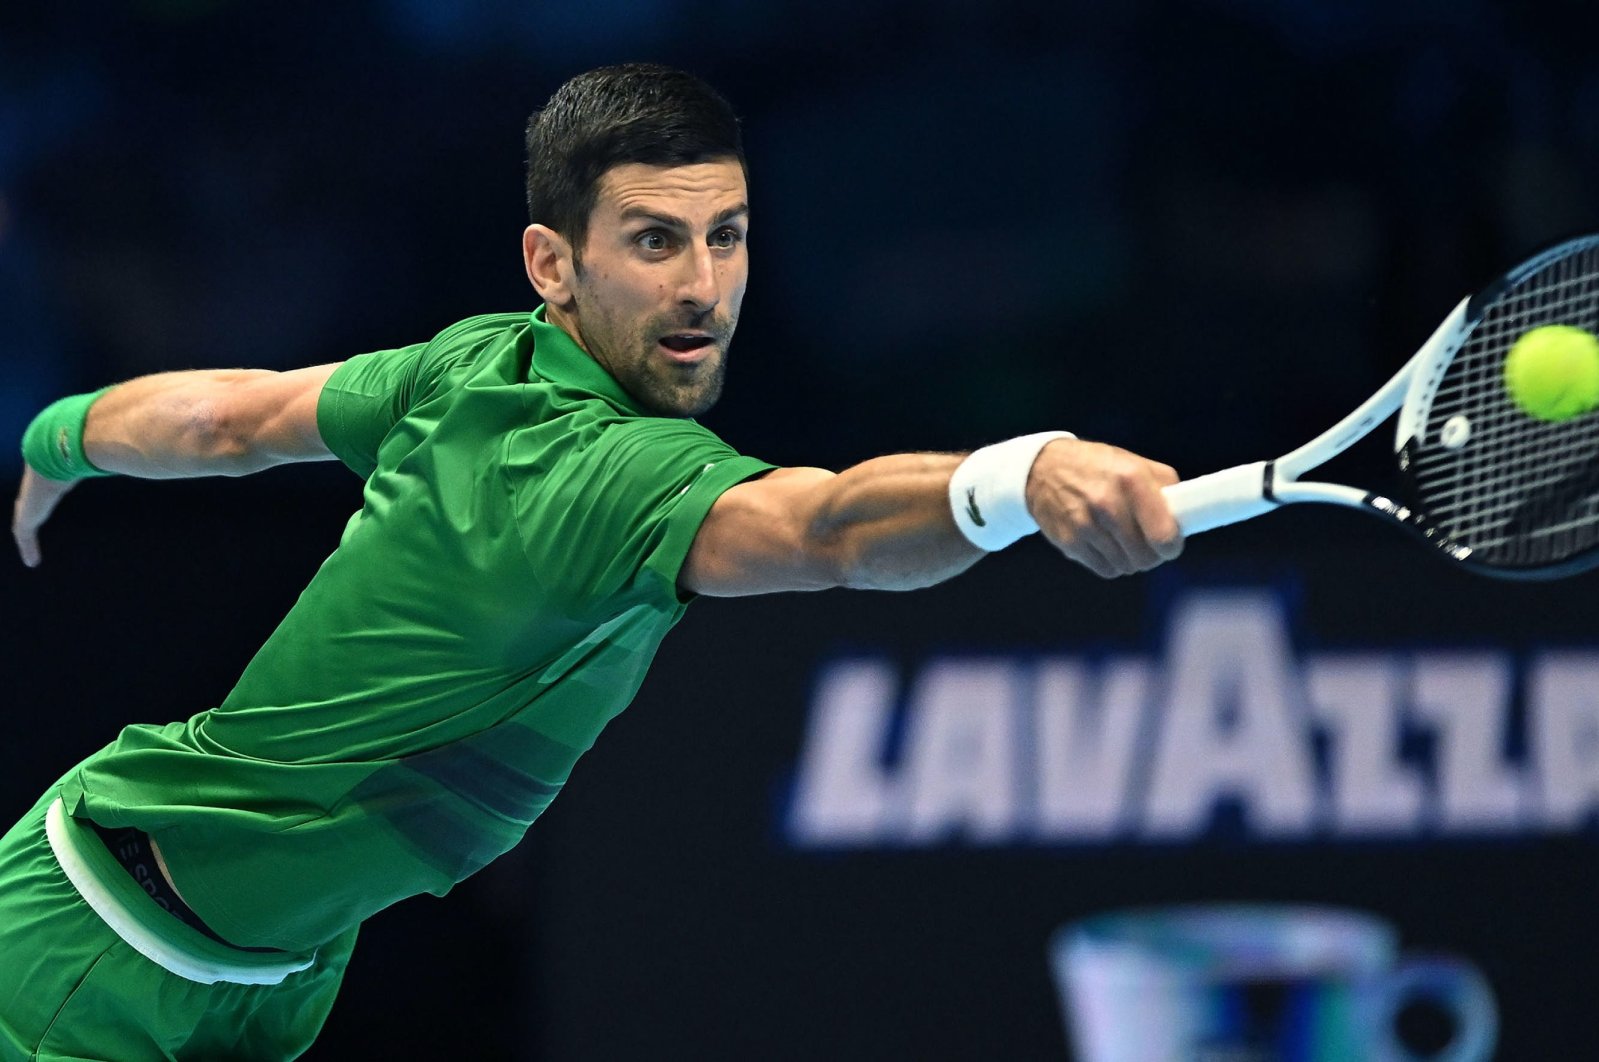 Novak Djokovic of Serbia in action against Stefanos Tsitsipas of Greece during their group match of the Nitto ATP Finals 2022 tennis tournament at the Pala Alpitour arena, Turin, Italy, Nov. 14 2022. (EPA Photo)